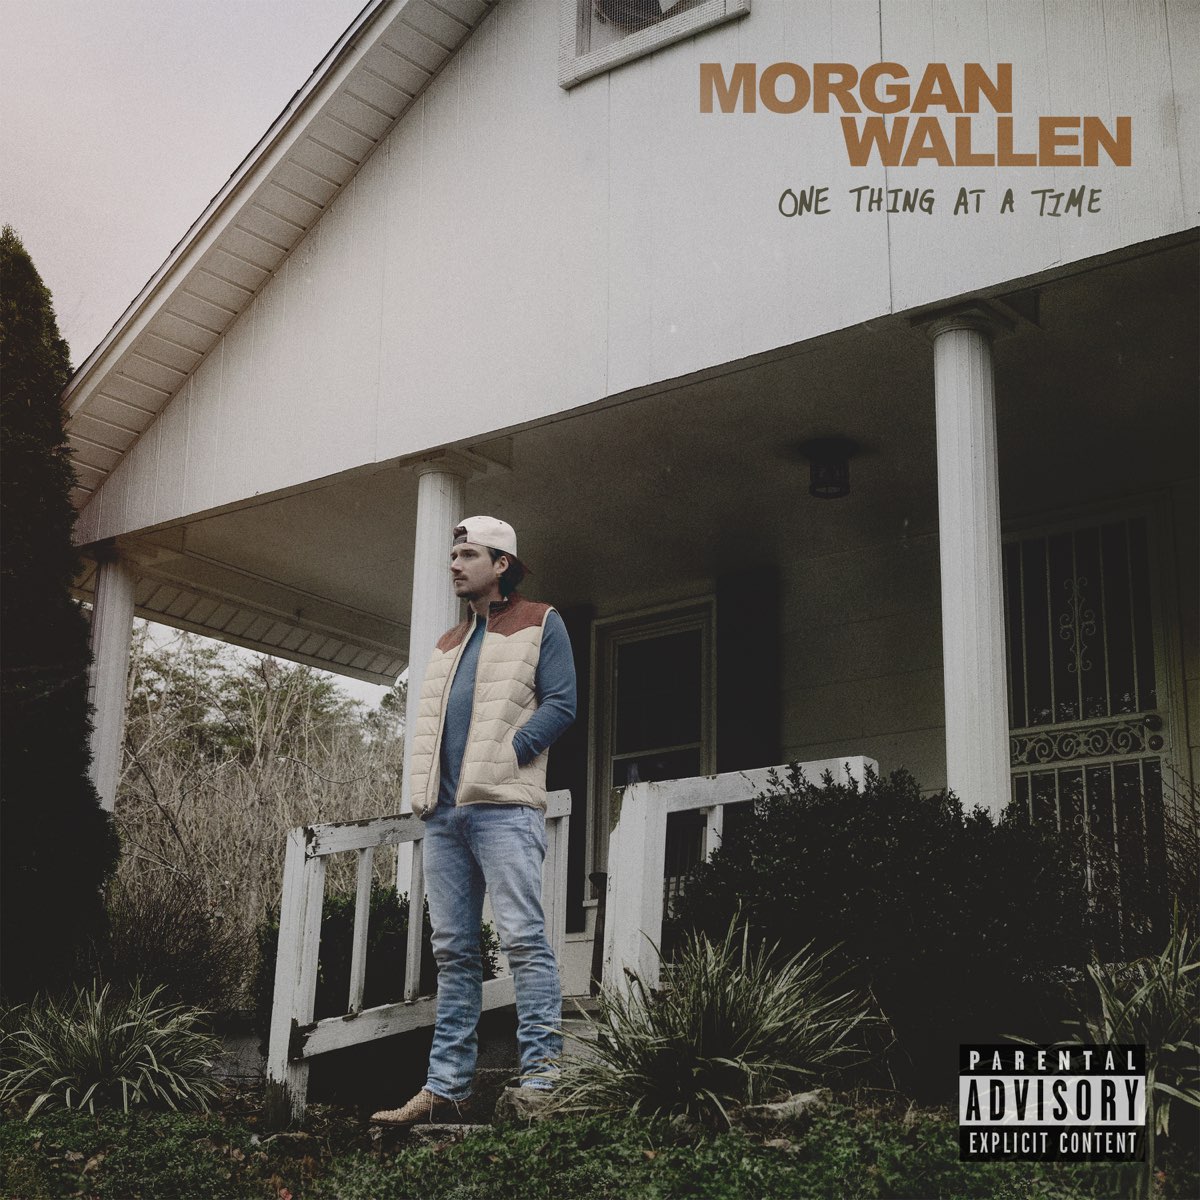 "One Thing at a Time" by Morgan Wallen album cover